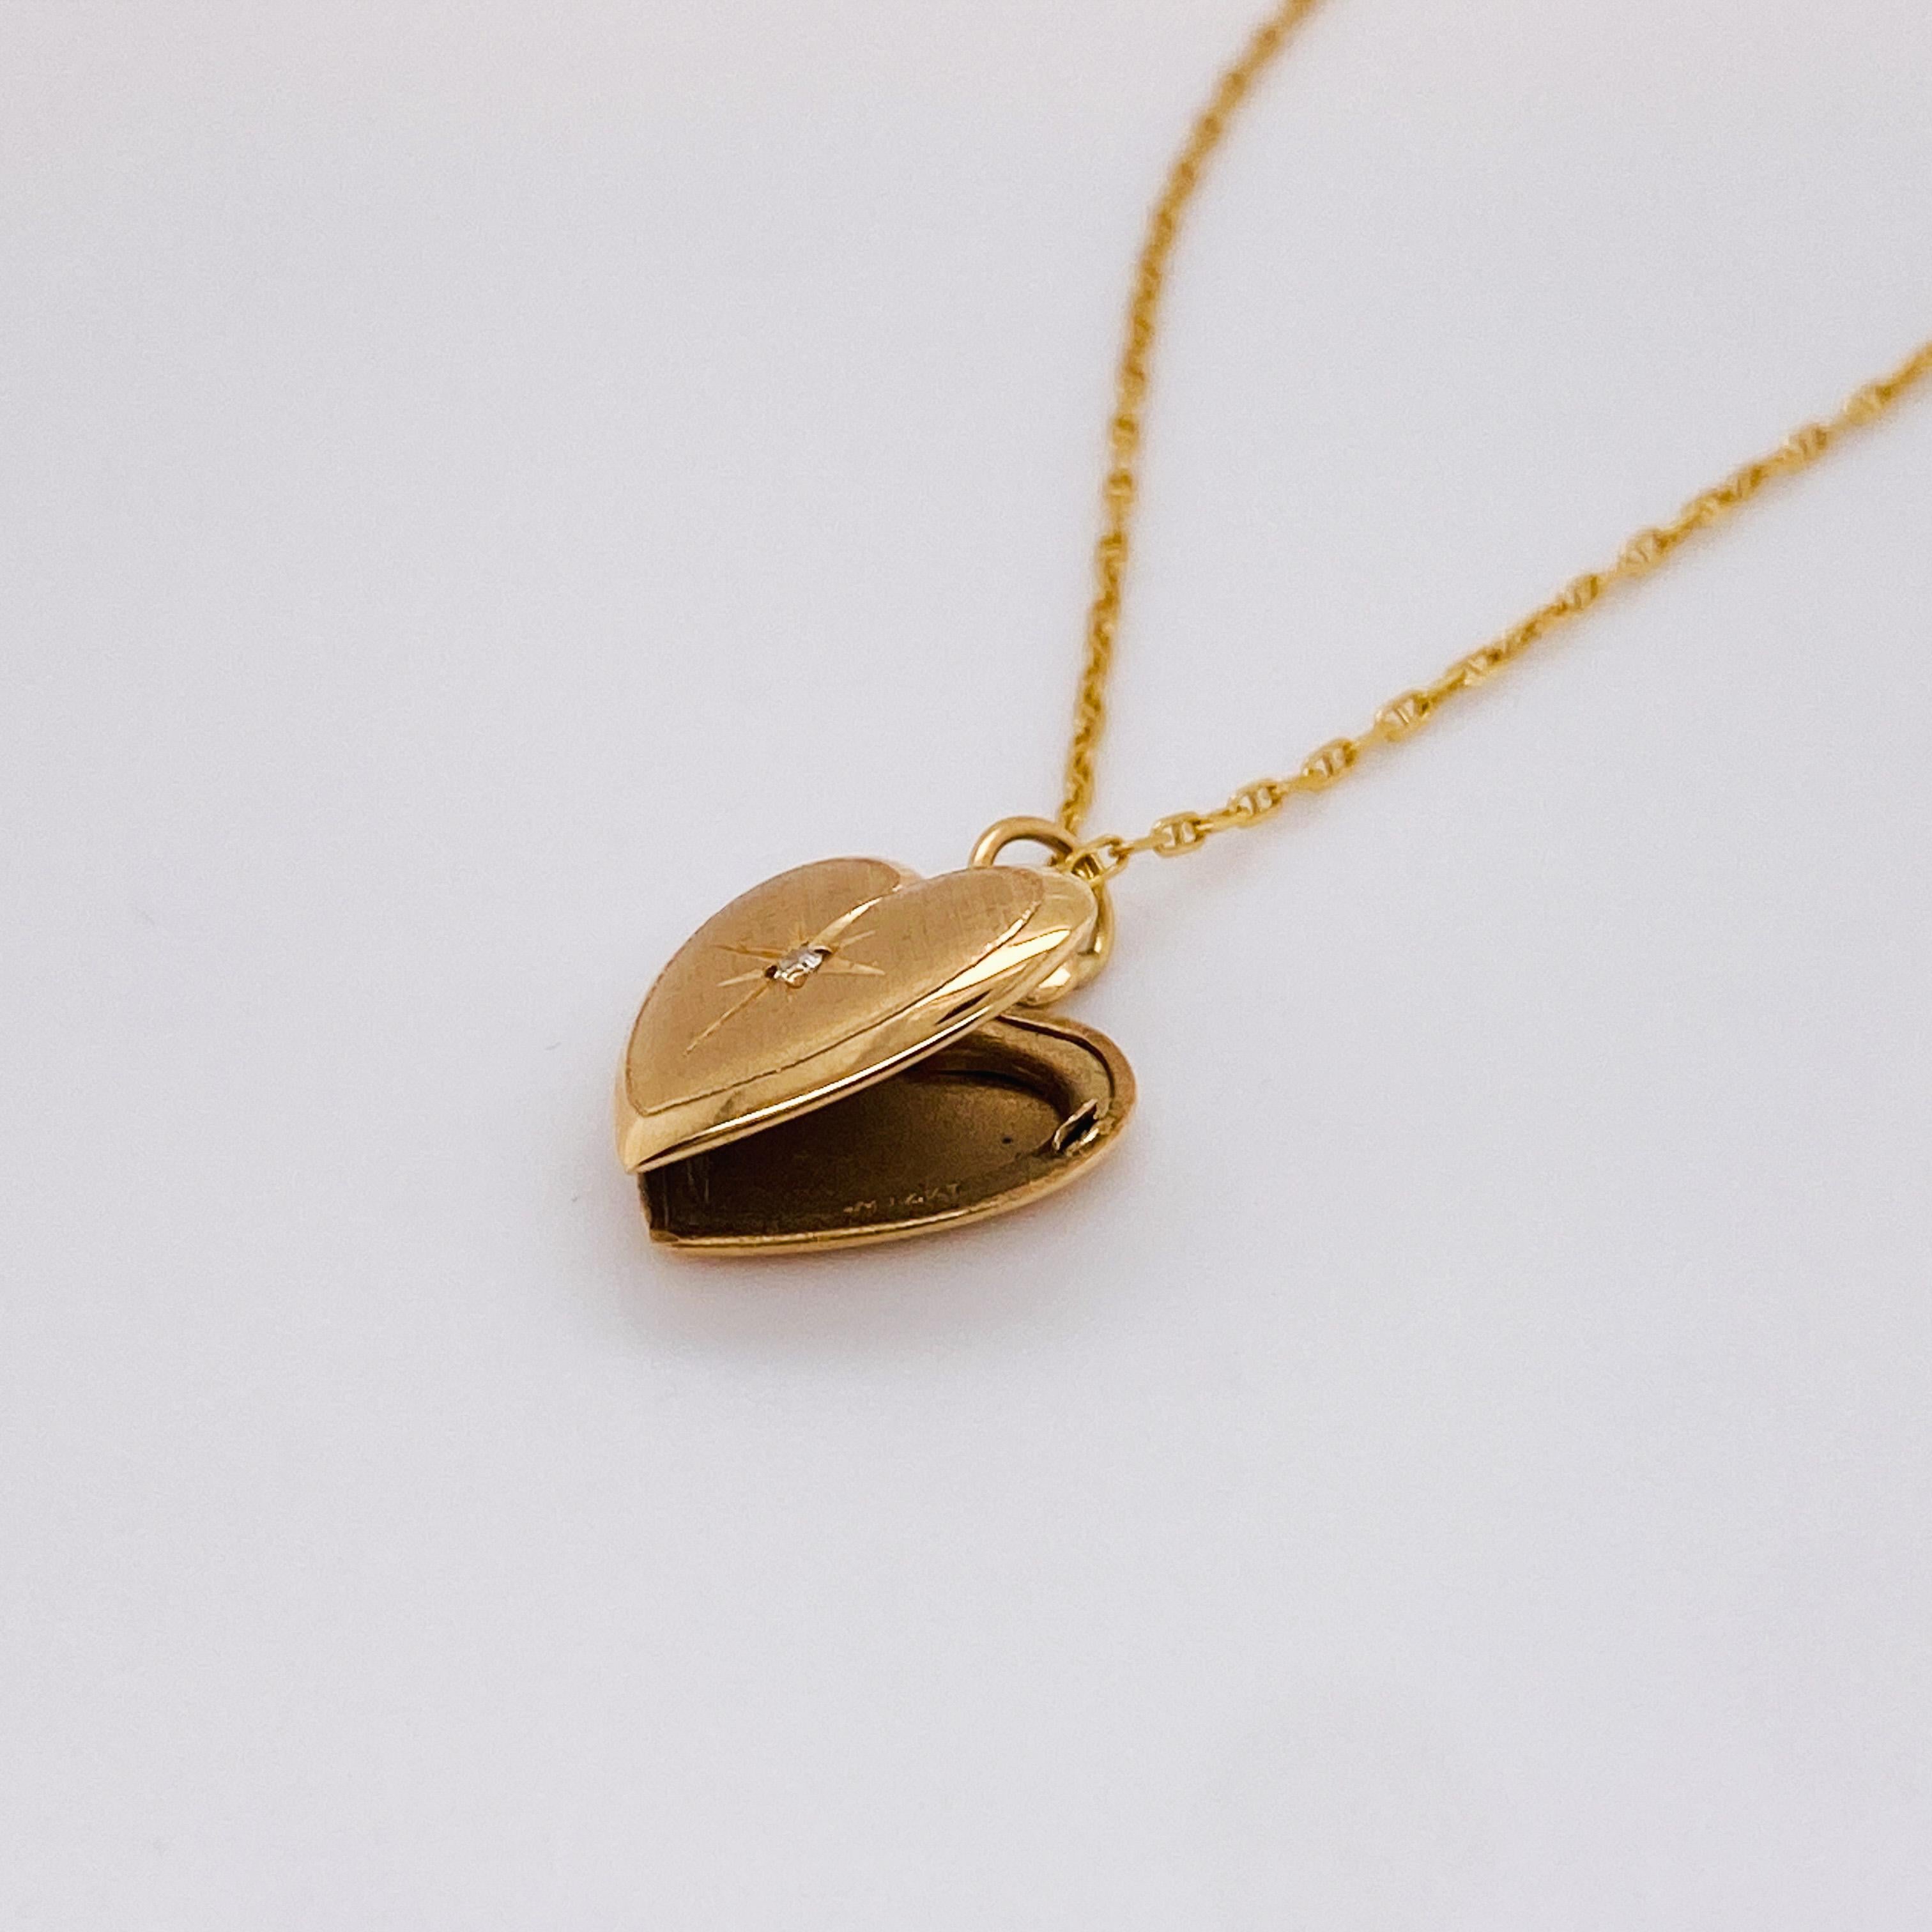 This vintage heart locket pendant and chain is perfect to cradle your love to your heart. The locket can hold two small photos or a tiny treasure inside. The locket and chain are entirely 14 karat gold. The front of the locket has a cross Florentine